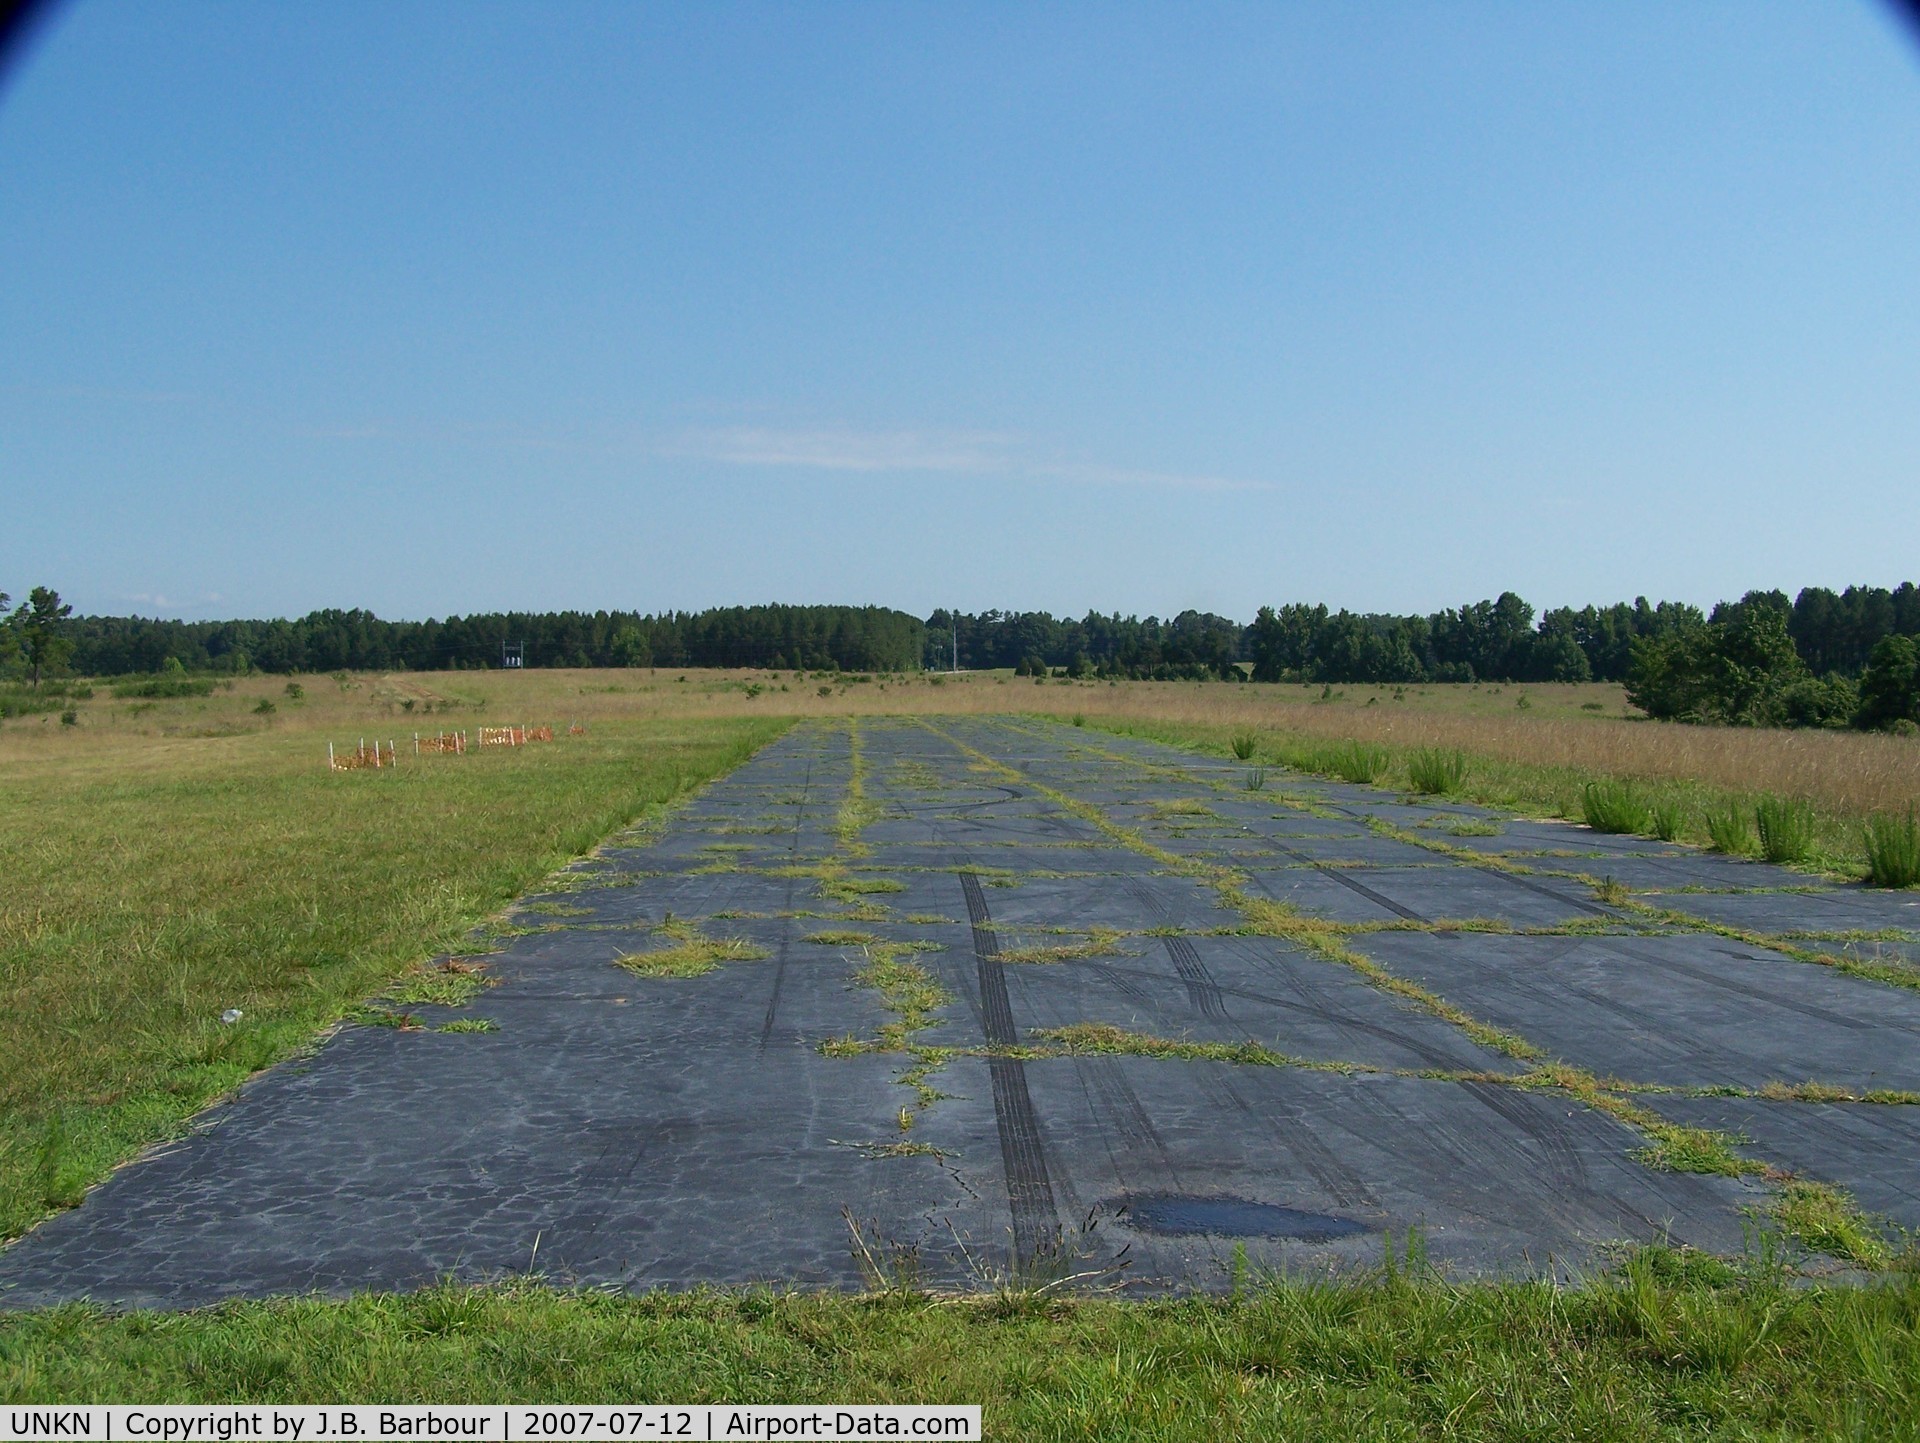 UNKN Airport - Possible an outdated airstrip near Youngsville,NC